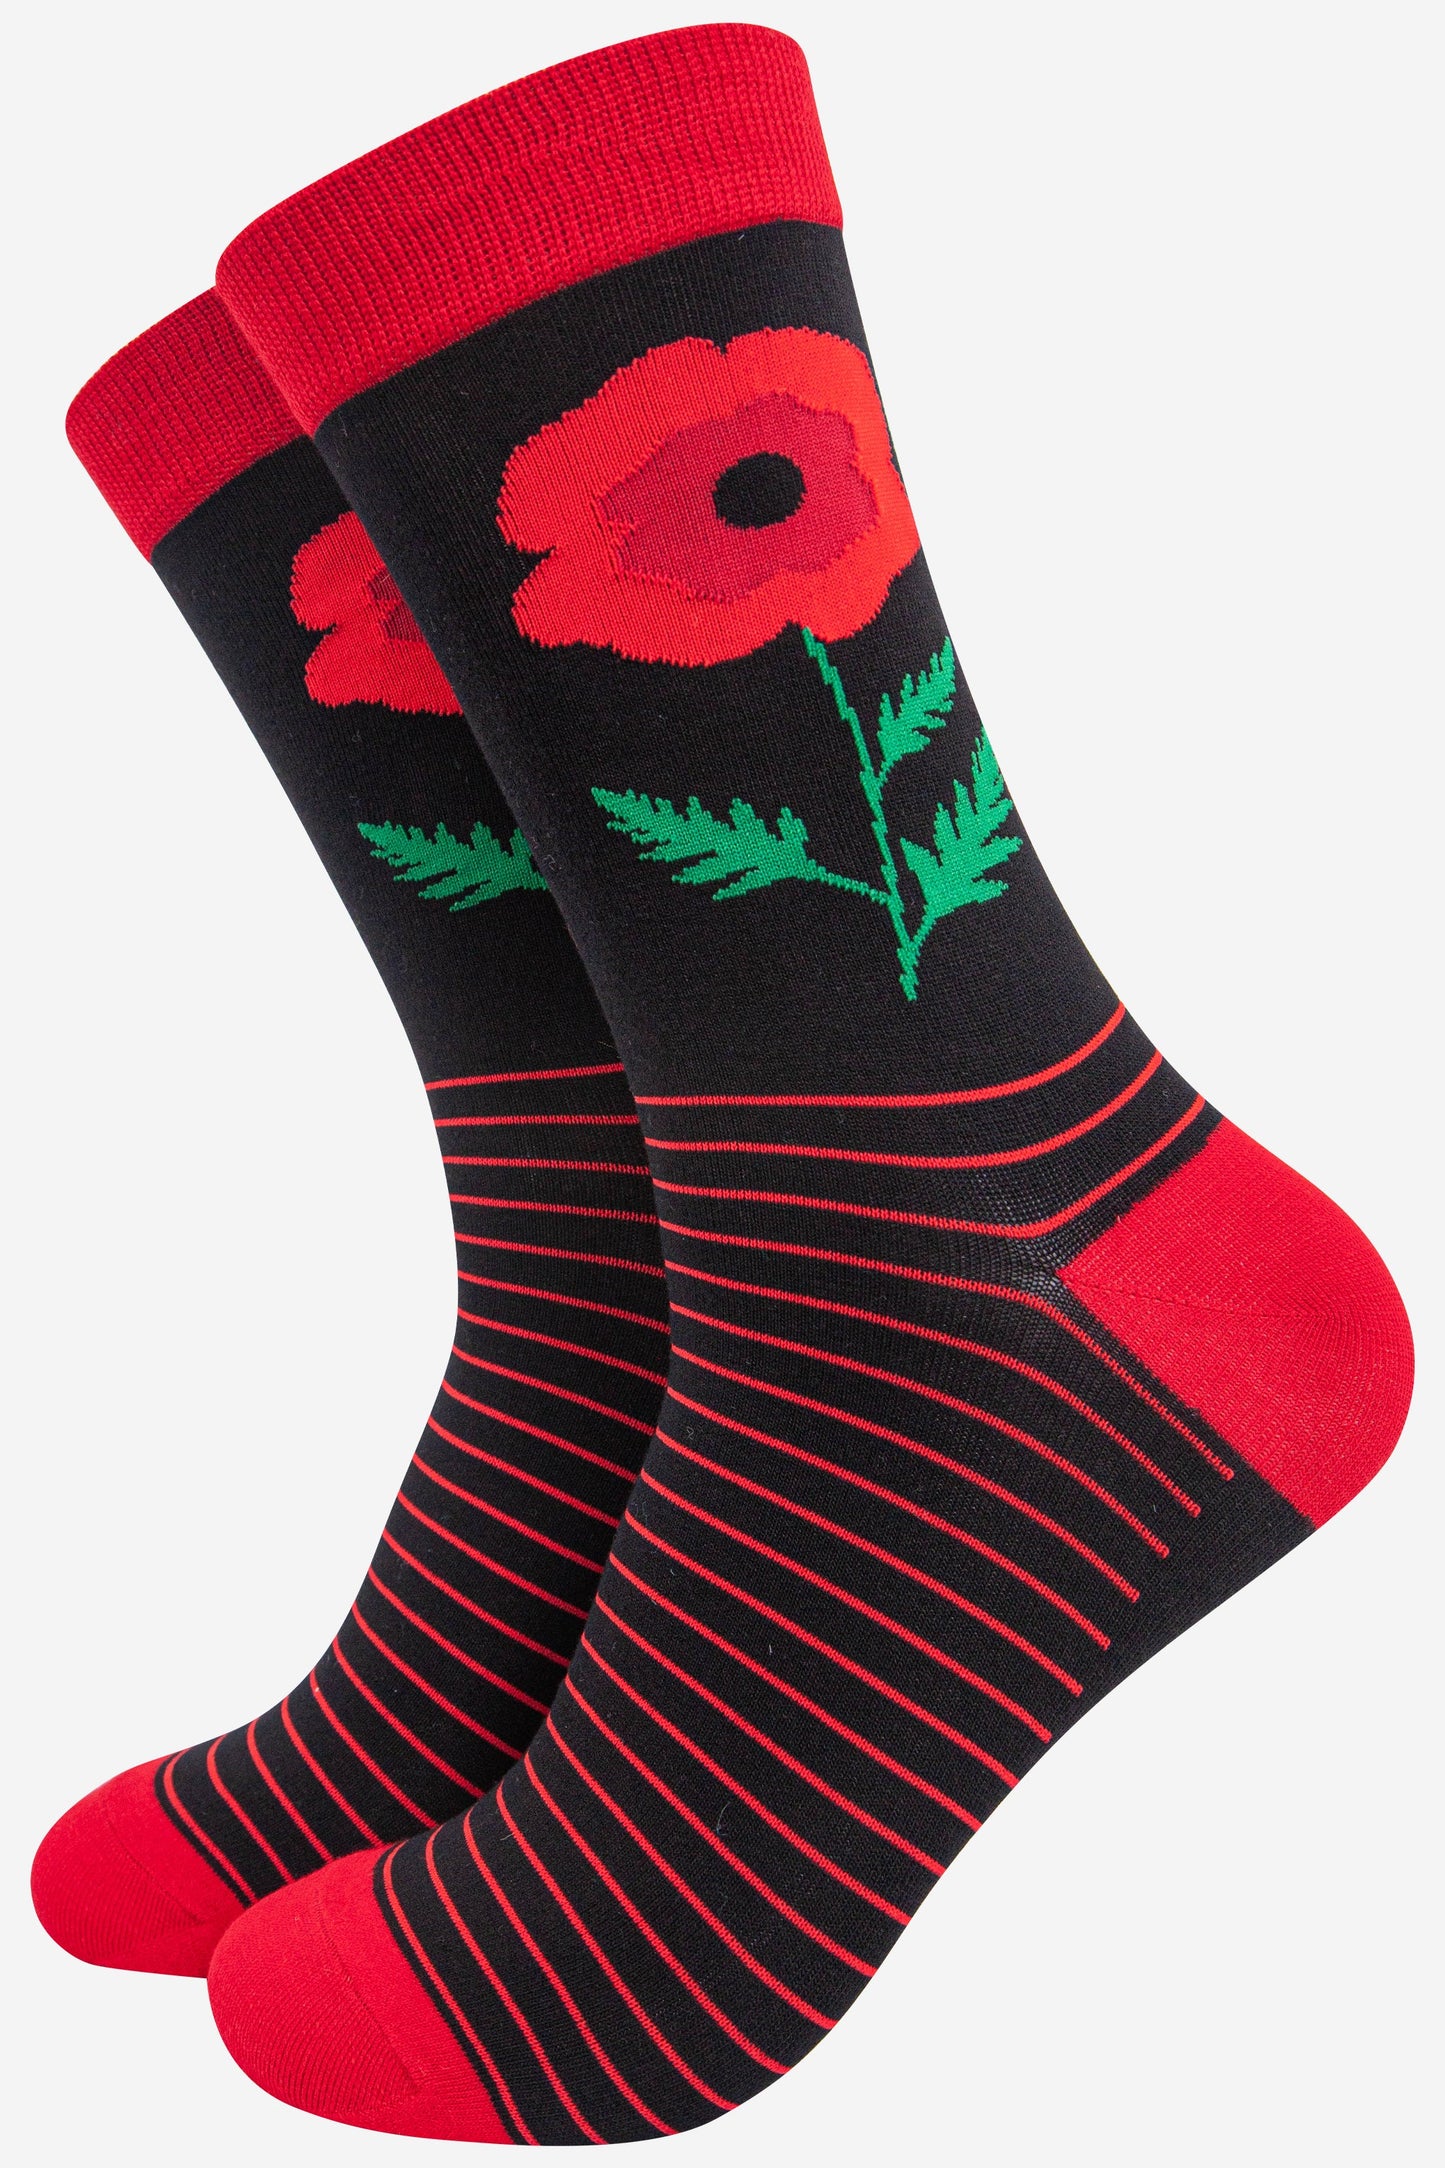 mens bamboo socks featuring a large red remembrance poppy flower and red stripes